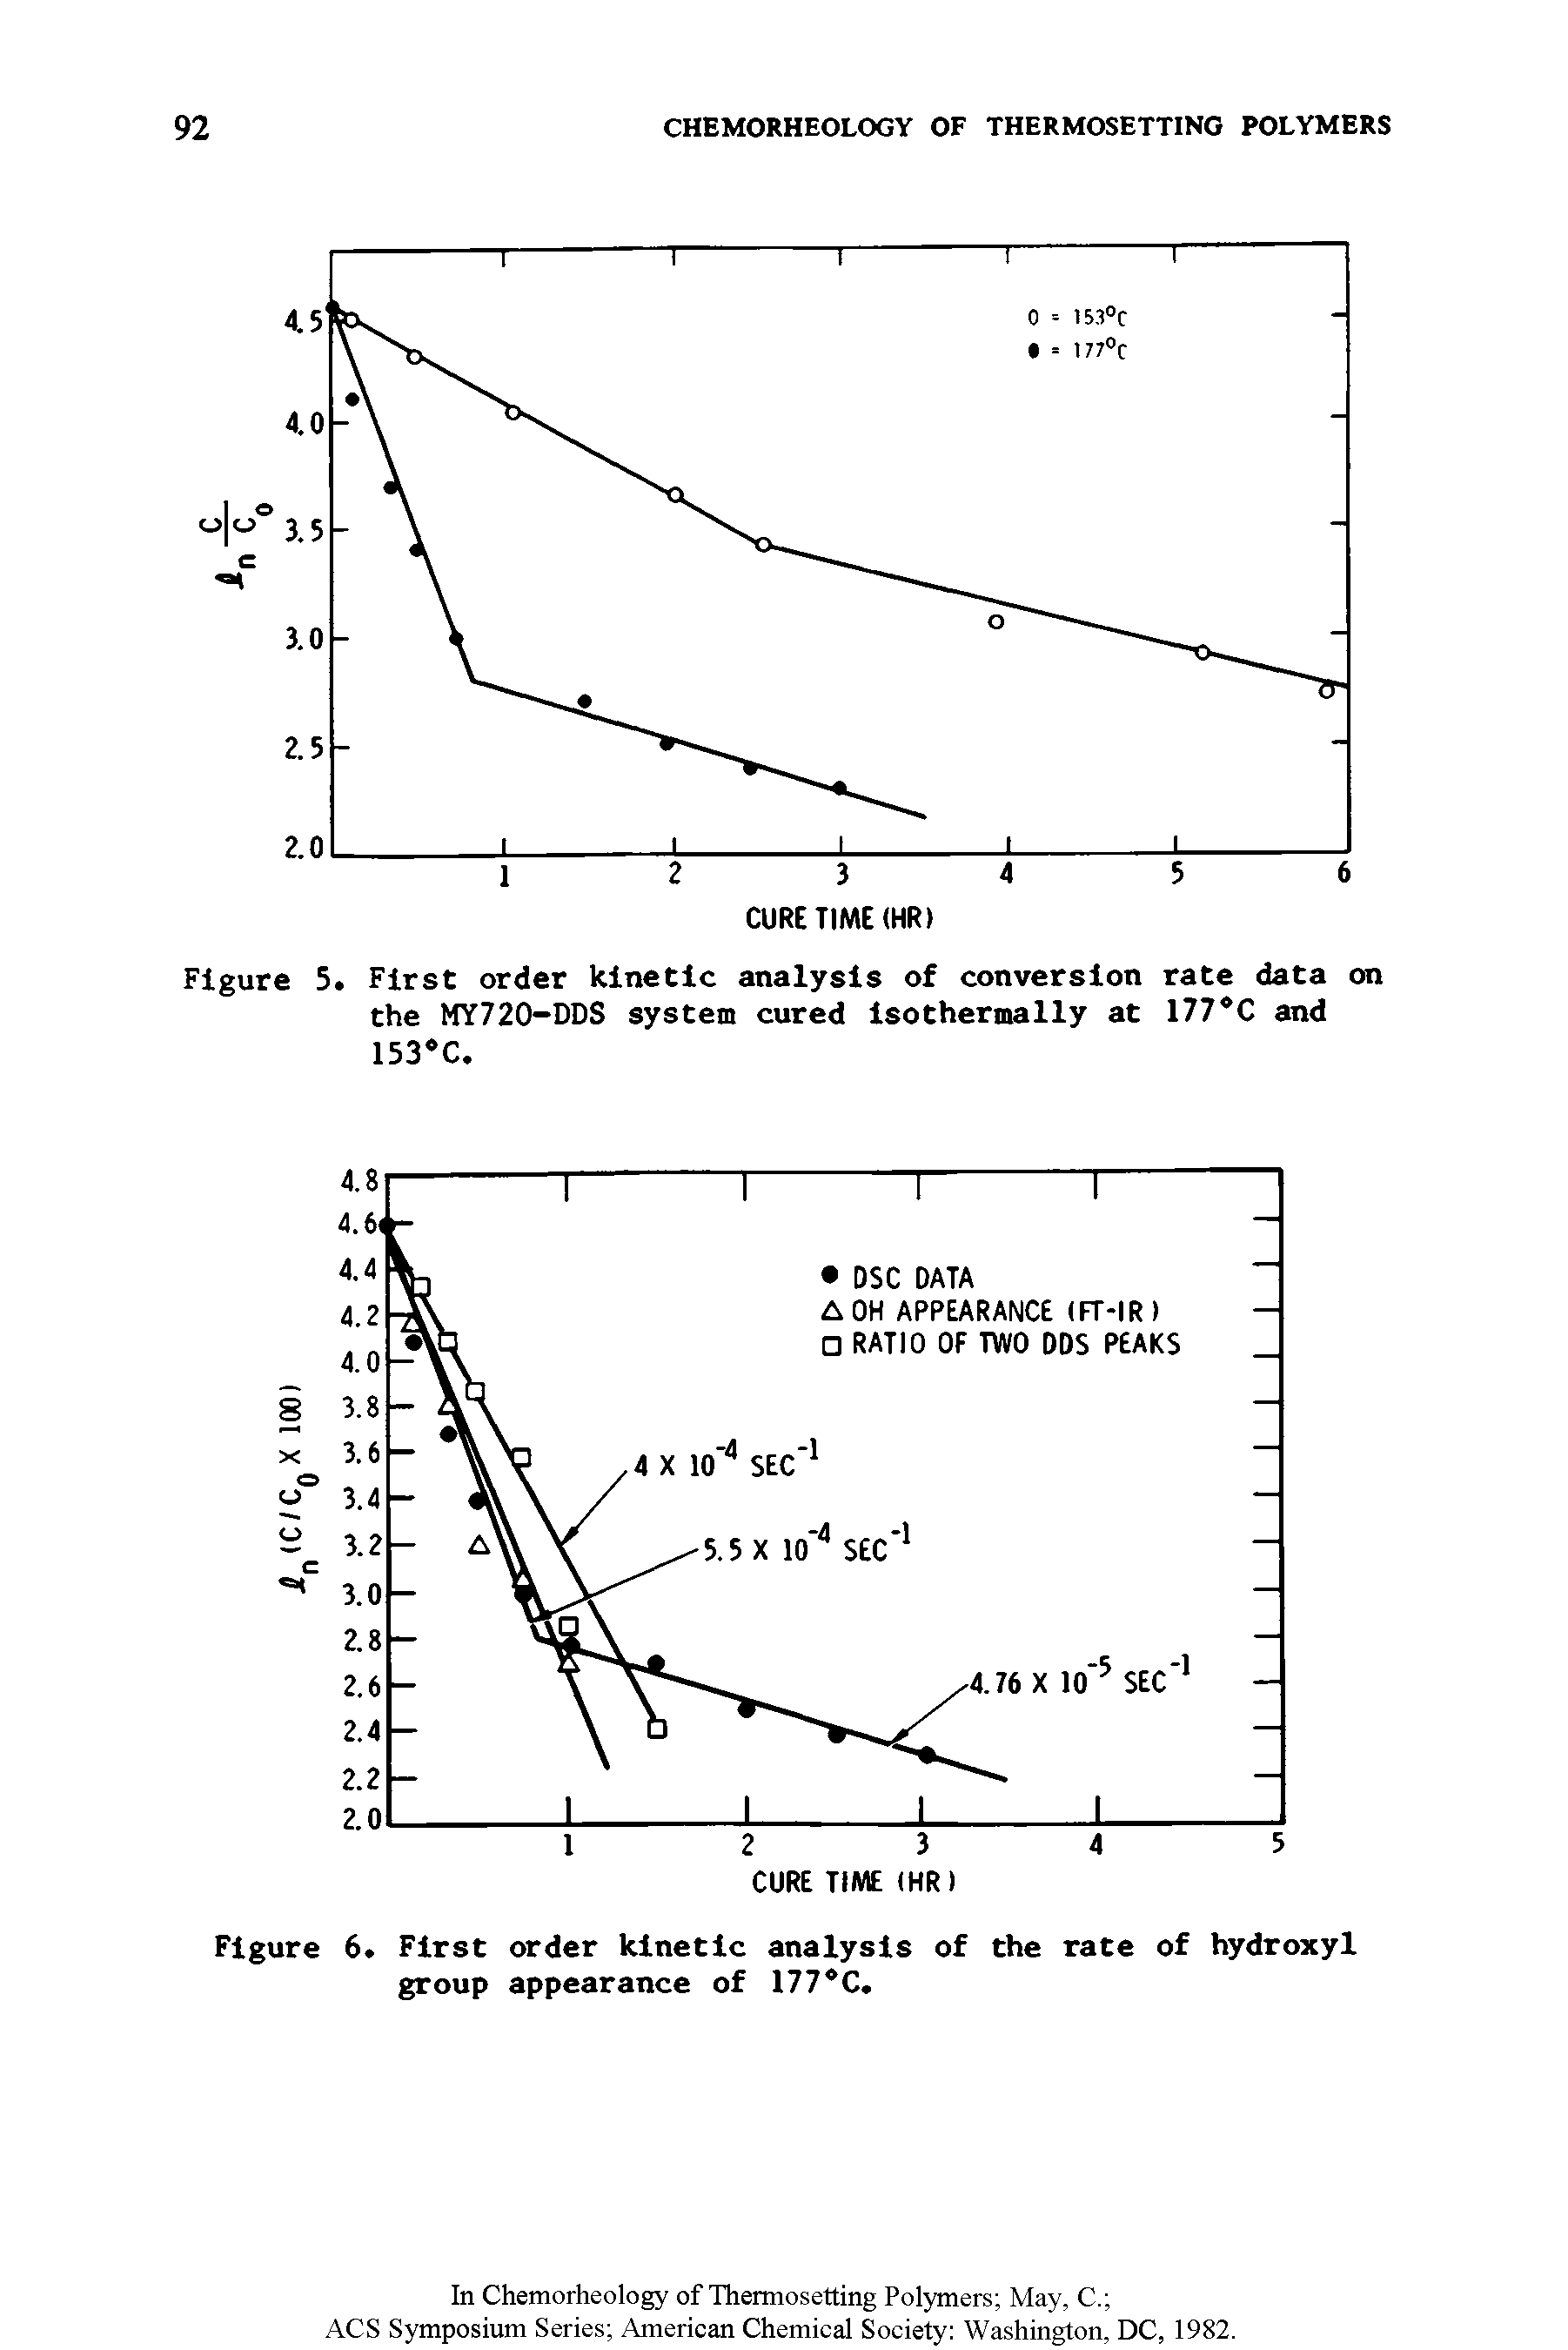 Figure 5. First order kinetic analysis of conversion rate data on the MY720-DDS system cured Isothermally at 177 C and 153 C.